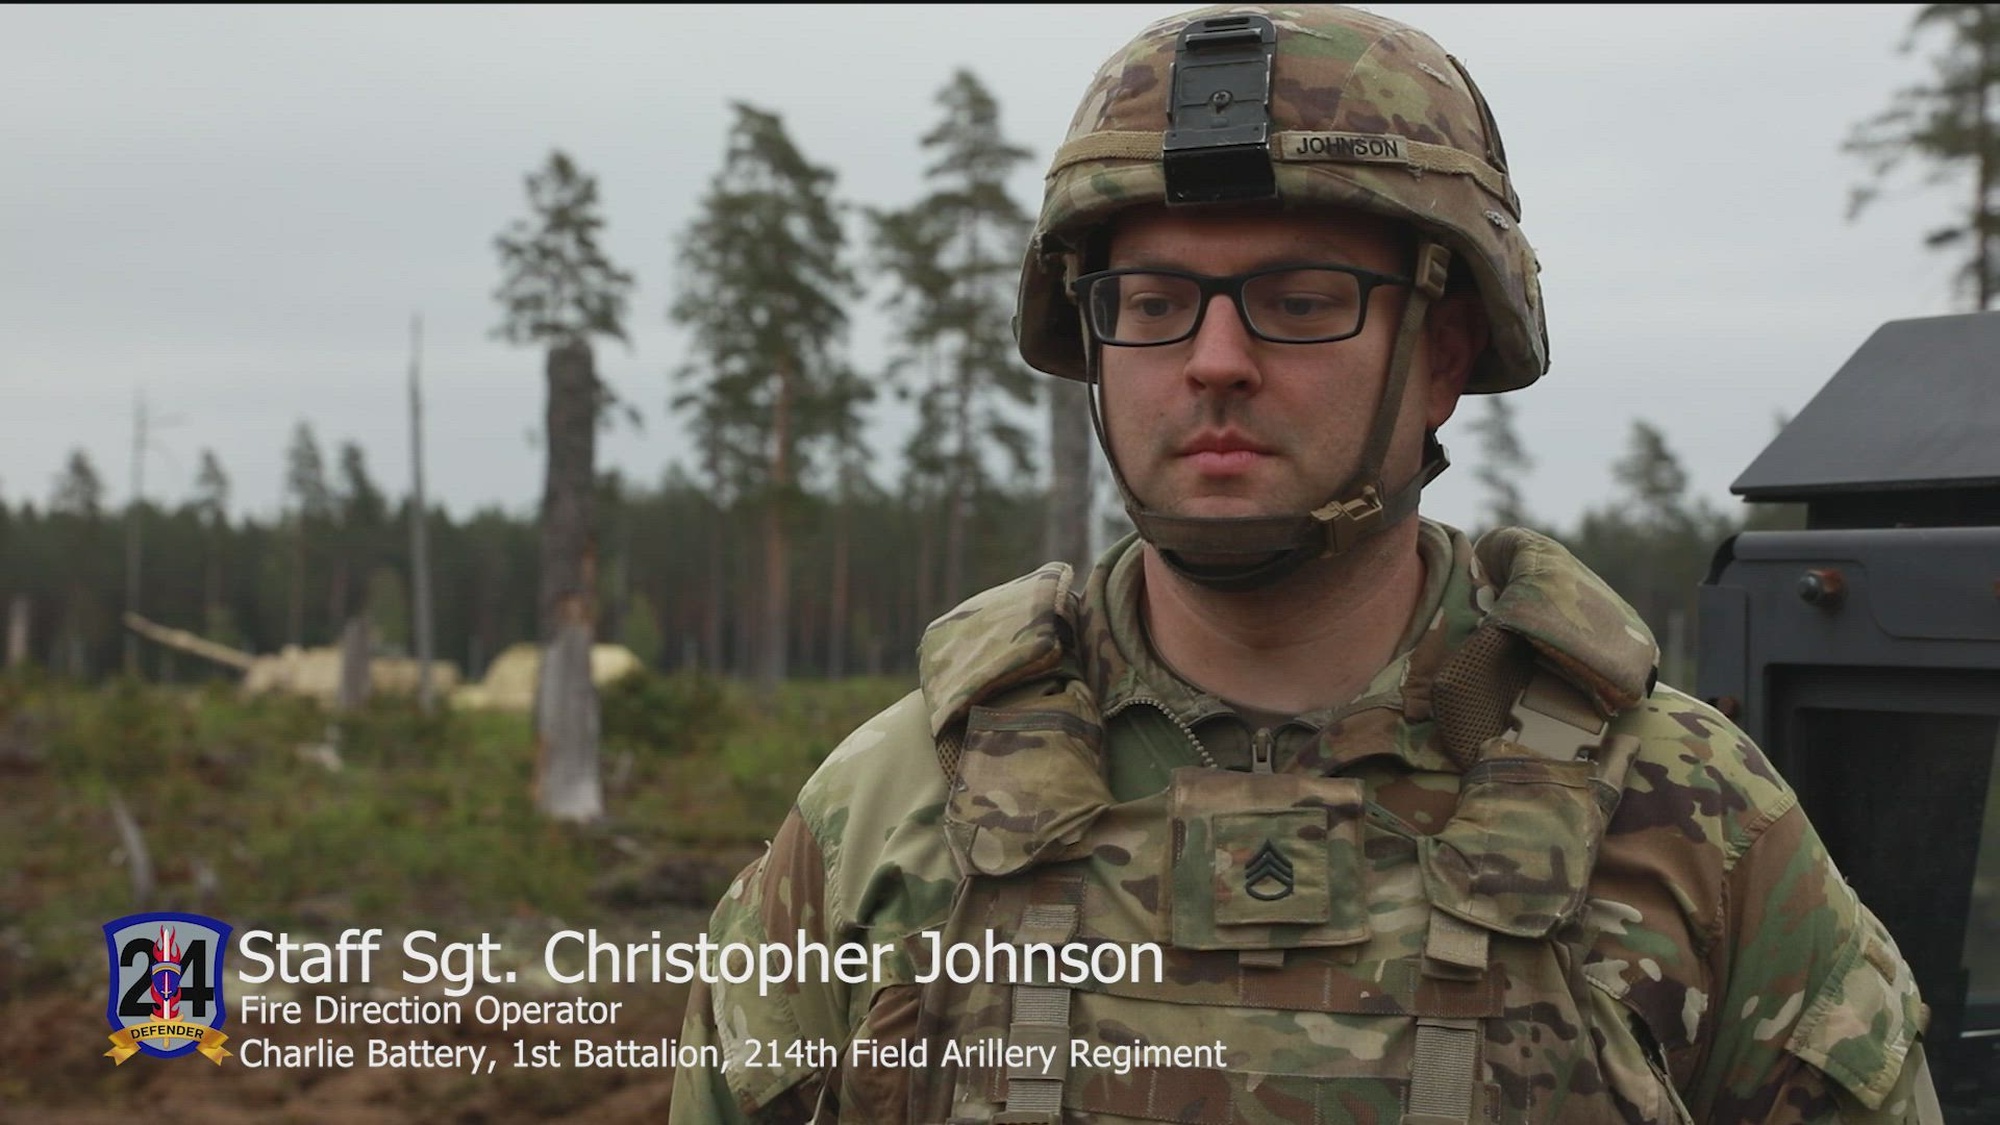 U.S. Army Staff Sgt. Christopher Johnson, assigned to the Ellenwood-based, Charlie Battery, 1st Battalion, 214th Artillery Regiment, 648th Maneuver Enhancement Brigade, Georgia Army National Guard, talks about the exercises during the DEFENDER 24 exercise in Skillingaryd, Sweden on May 7, 2024. DEFENDER 24 is the Dynamic Employment of Forces to Europe for NATO Deterrence and Enhanced Readiness, and is a U.S. European Command scheduled, U.S. Army Europe and Africa conducted exercises that consist of Saber Strike, Immediate Response, Swift Response. DEFENDER 24 is linked to NATO's Steadfast Defender exercise, and DoD's Large Scale Global Exercise, taking place from 28 March to 31 May. DEFENDER 24 is the largest U.S. Army exercise in Europe and includes more than 17,000 U.S. and 23,000 multinational service members from more than 20 Allied and partner nations, including Croatia, Czechia, Denmark, Estonia, Finland, France, Germany, Georgia, Hungary, Italy, Latvia, Lithuania, Moldova, Netherlands, North Macedonia, Norway, Poland, Romania, Slovakia, Spain, Sweden, and the United Kingdom. (Army video by Spc. Jaylan Caulton and Spc. Ehron Ostendorf)